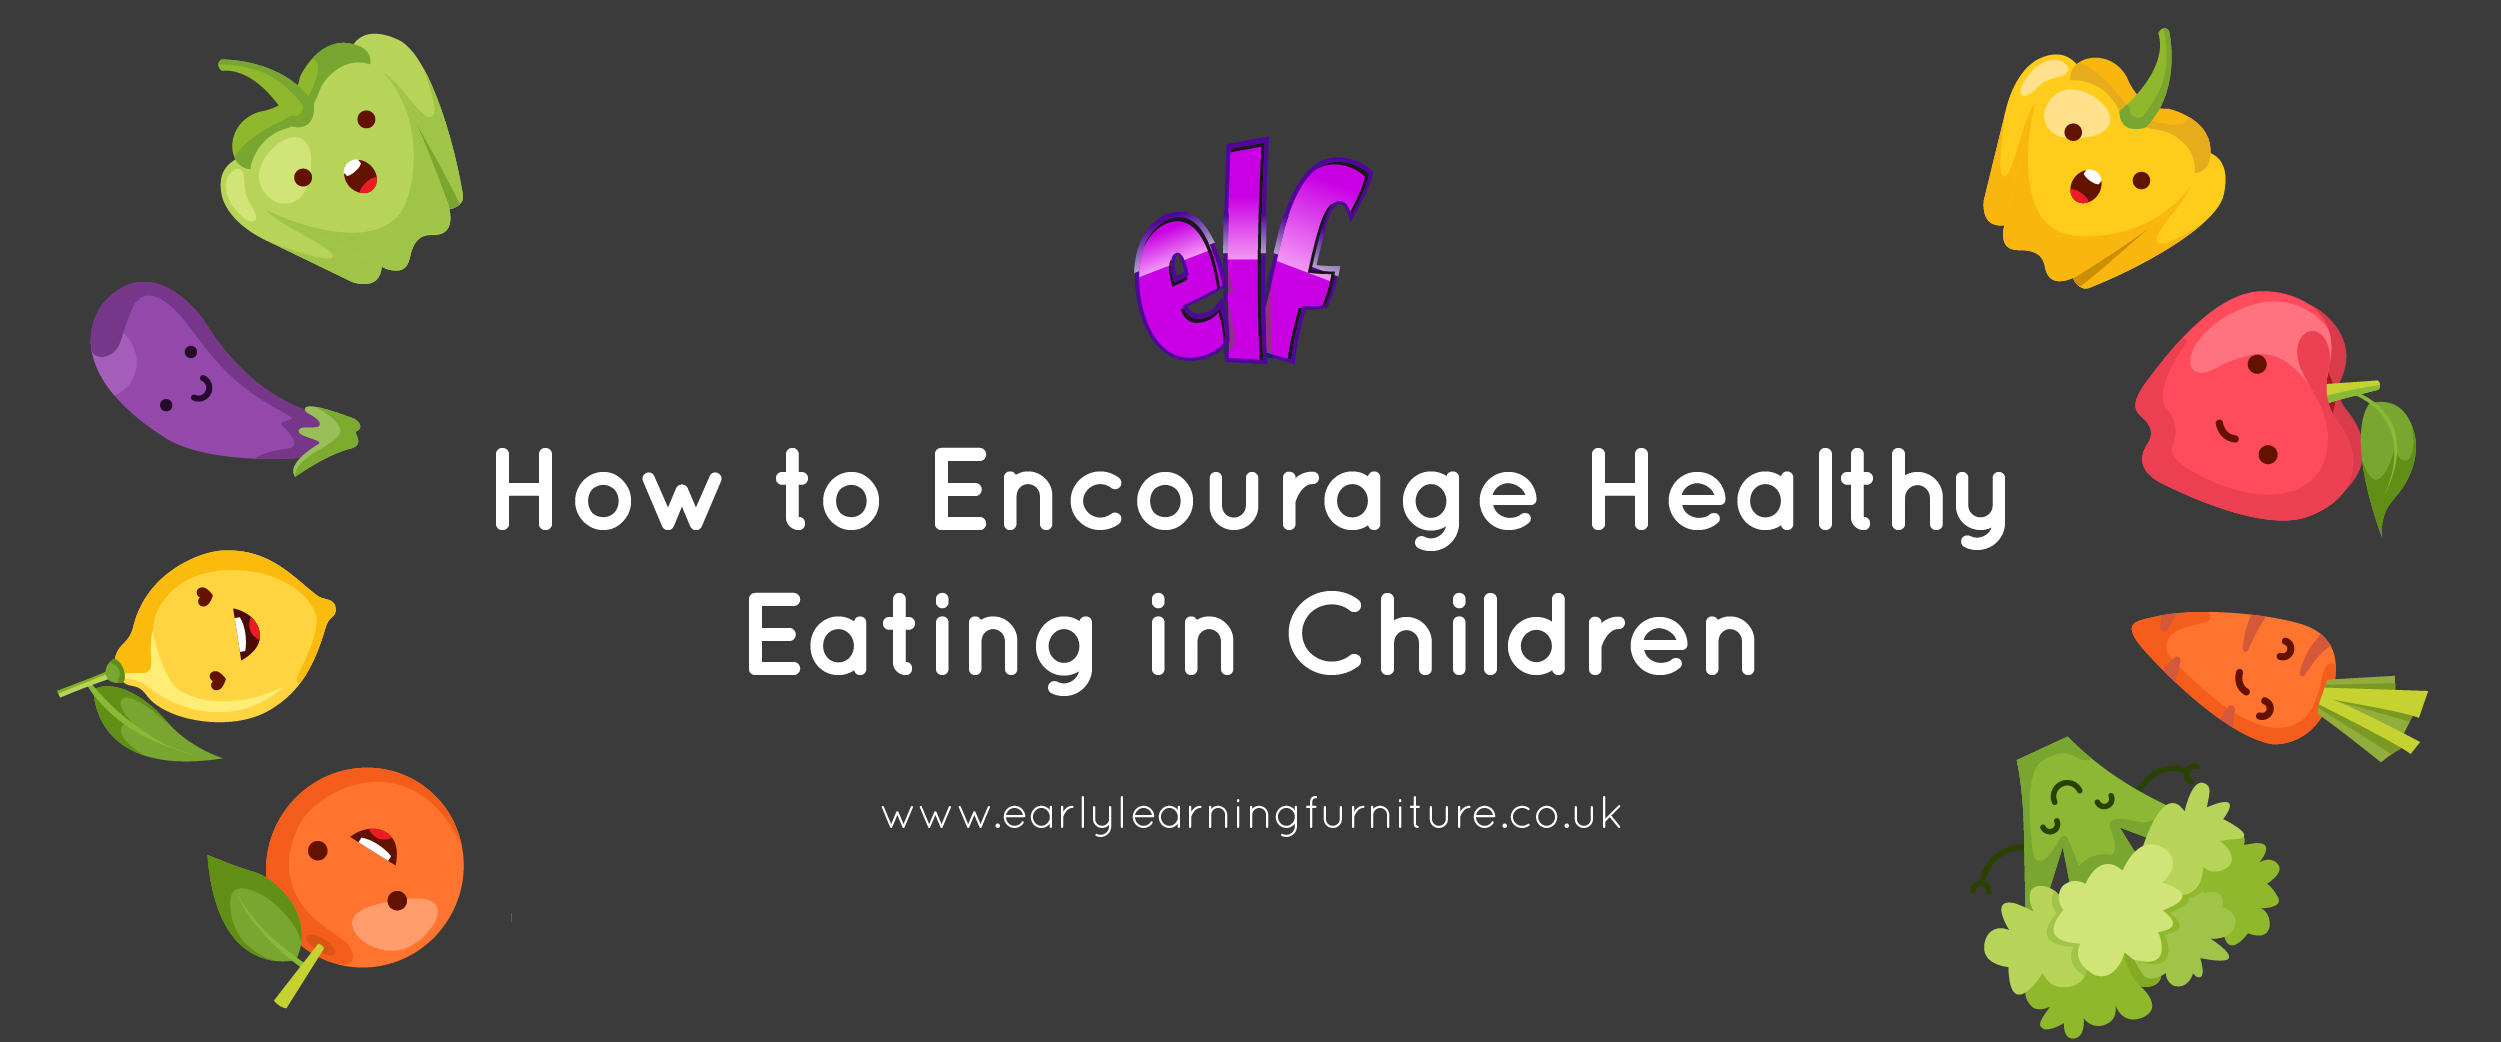 How to Encourage Healthy Eating in Children 